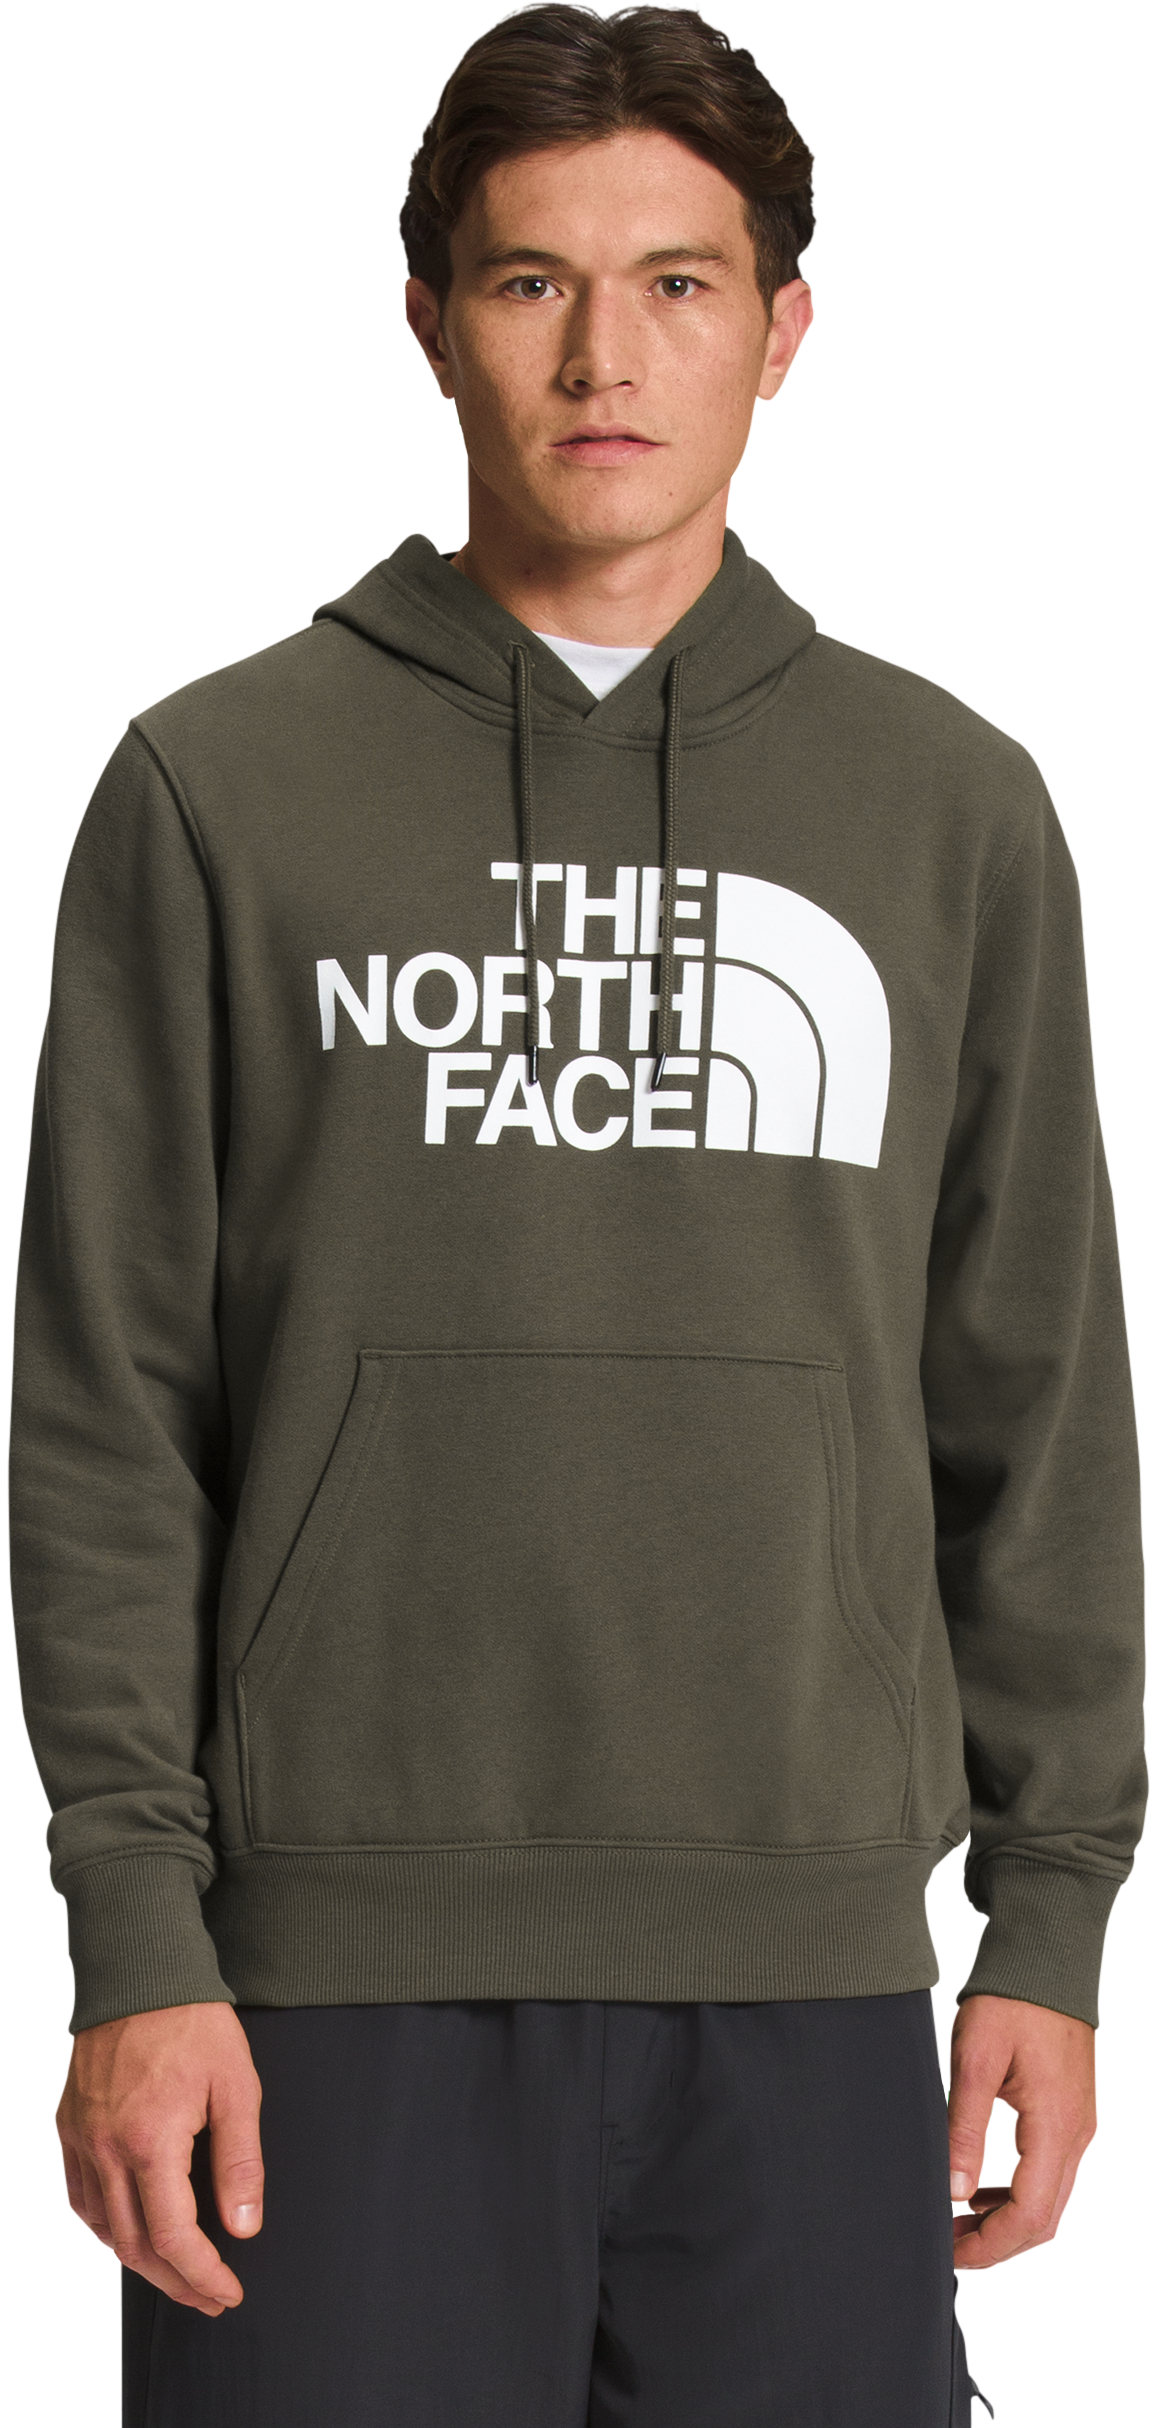 The North Face Half Dome Pullover Long-Sleeve Hoodie for Men - New Taupe Green - S